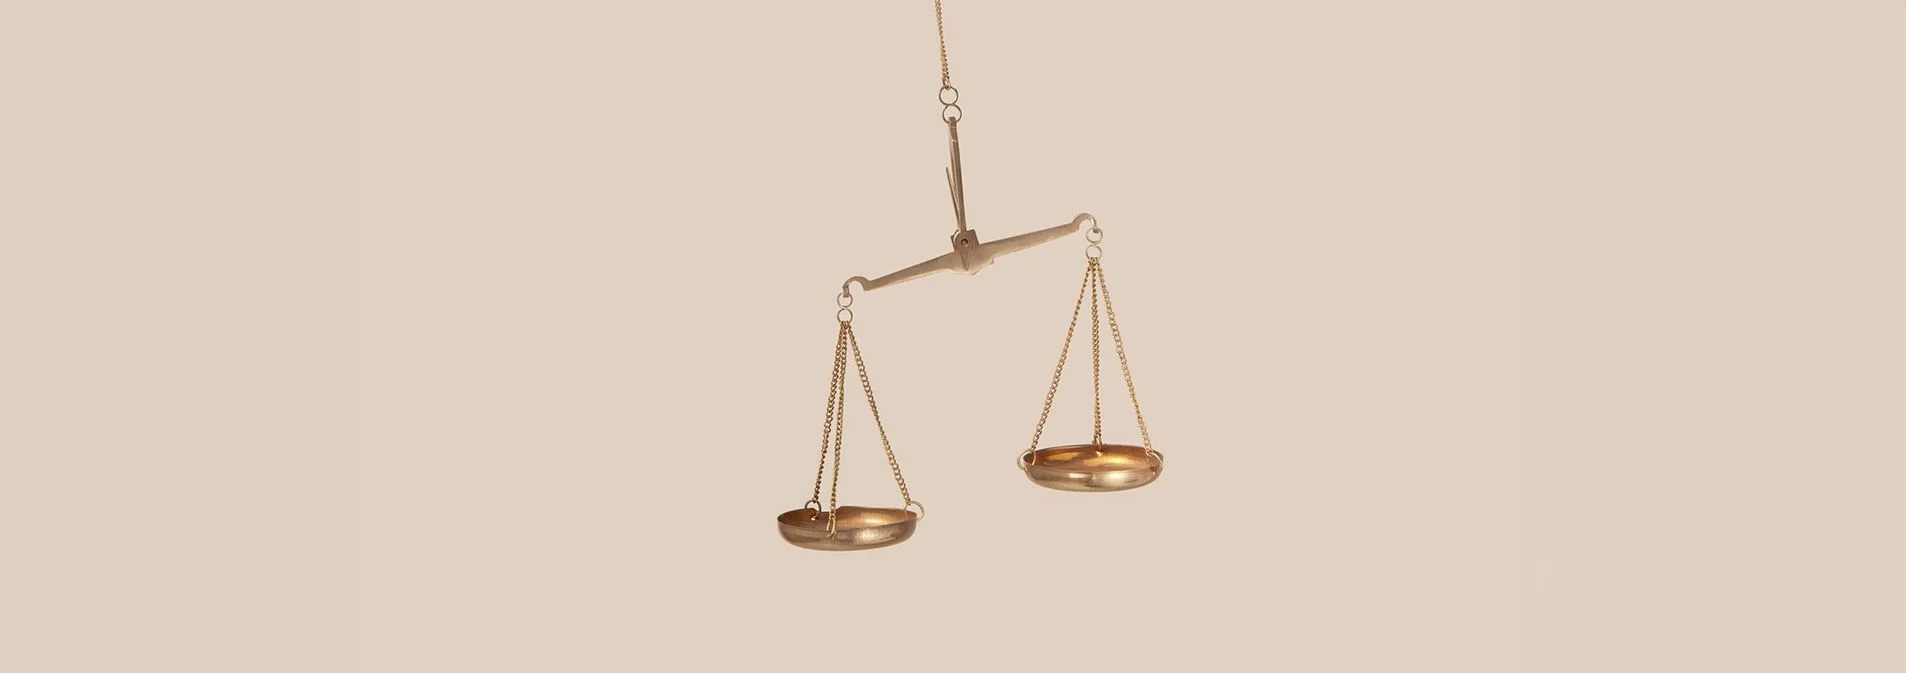 A balance scale tipped to one side